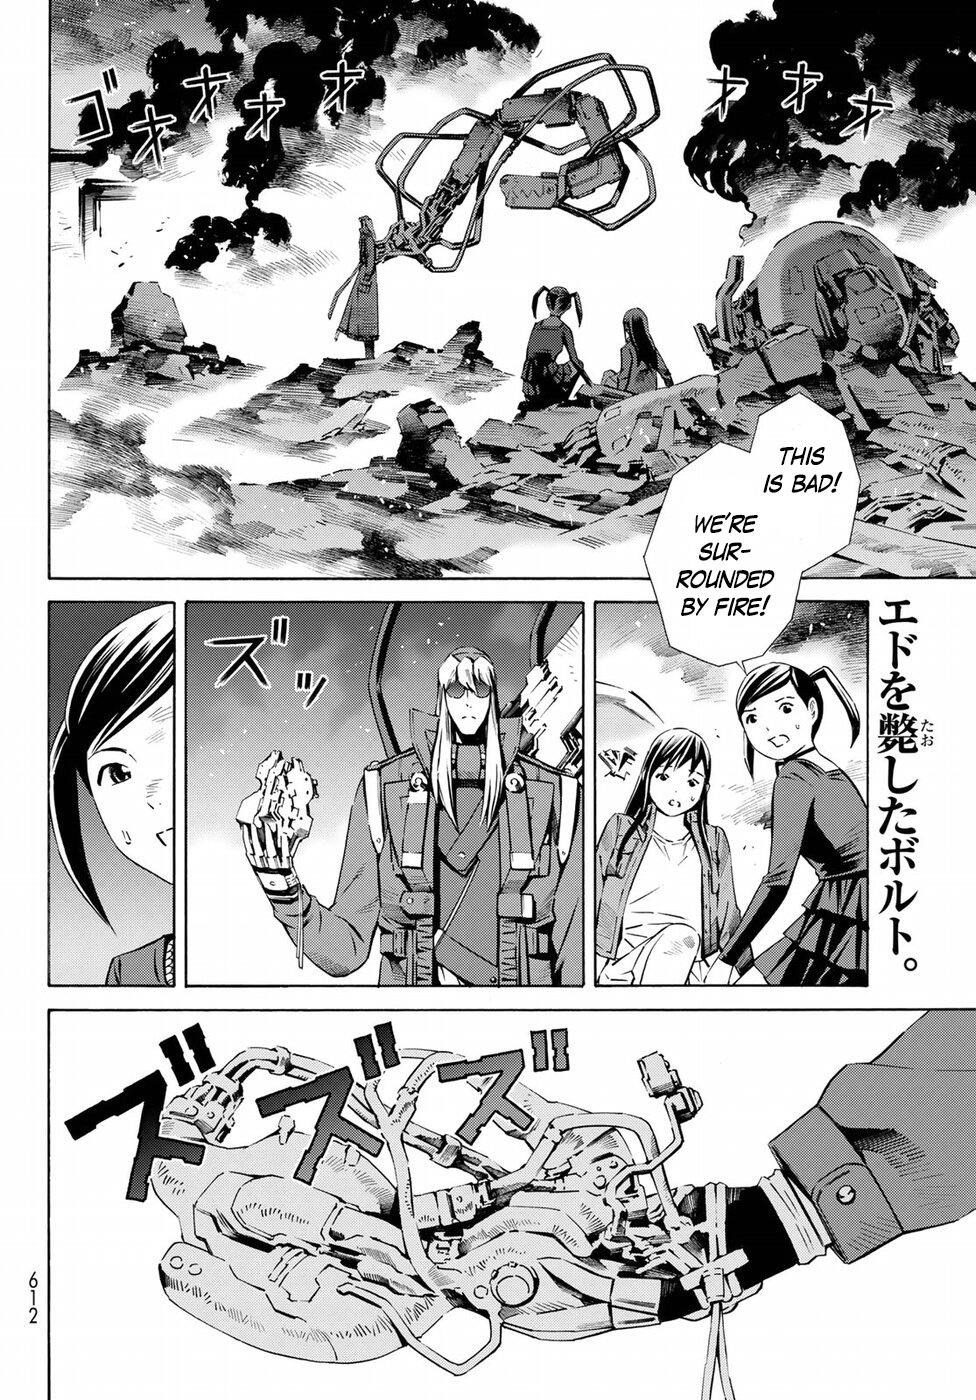 Eat Man The Main Dish Chapter 32 Read Eat Man The Main Dish Chapter 32 Online At Allmanga Us Page 2